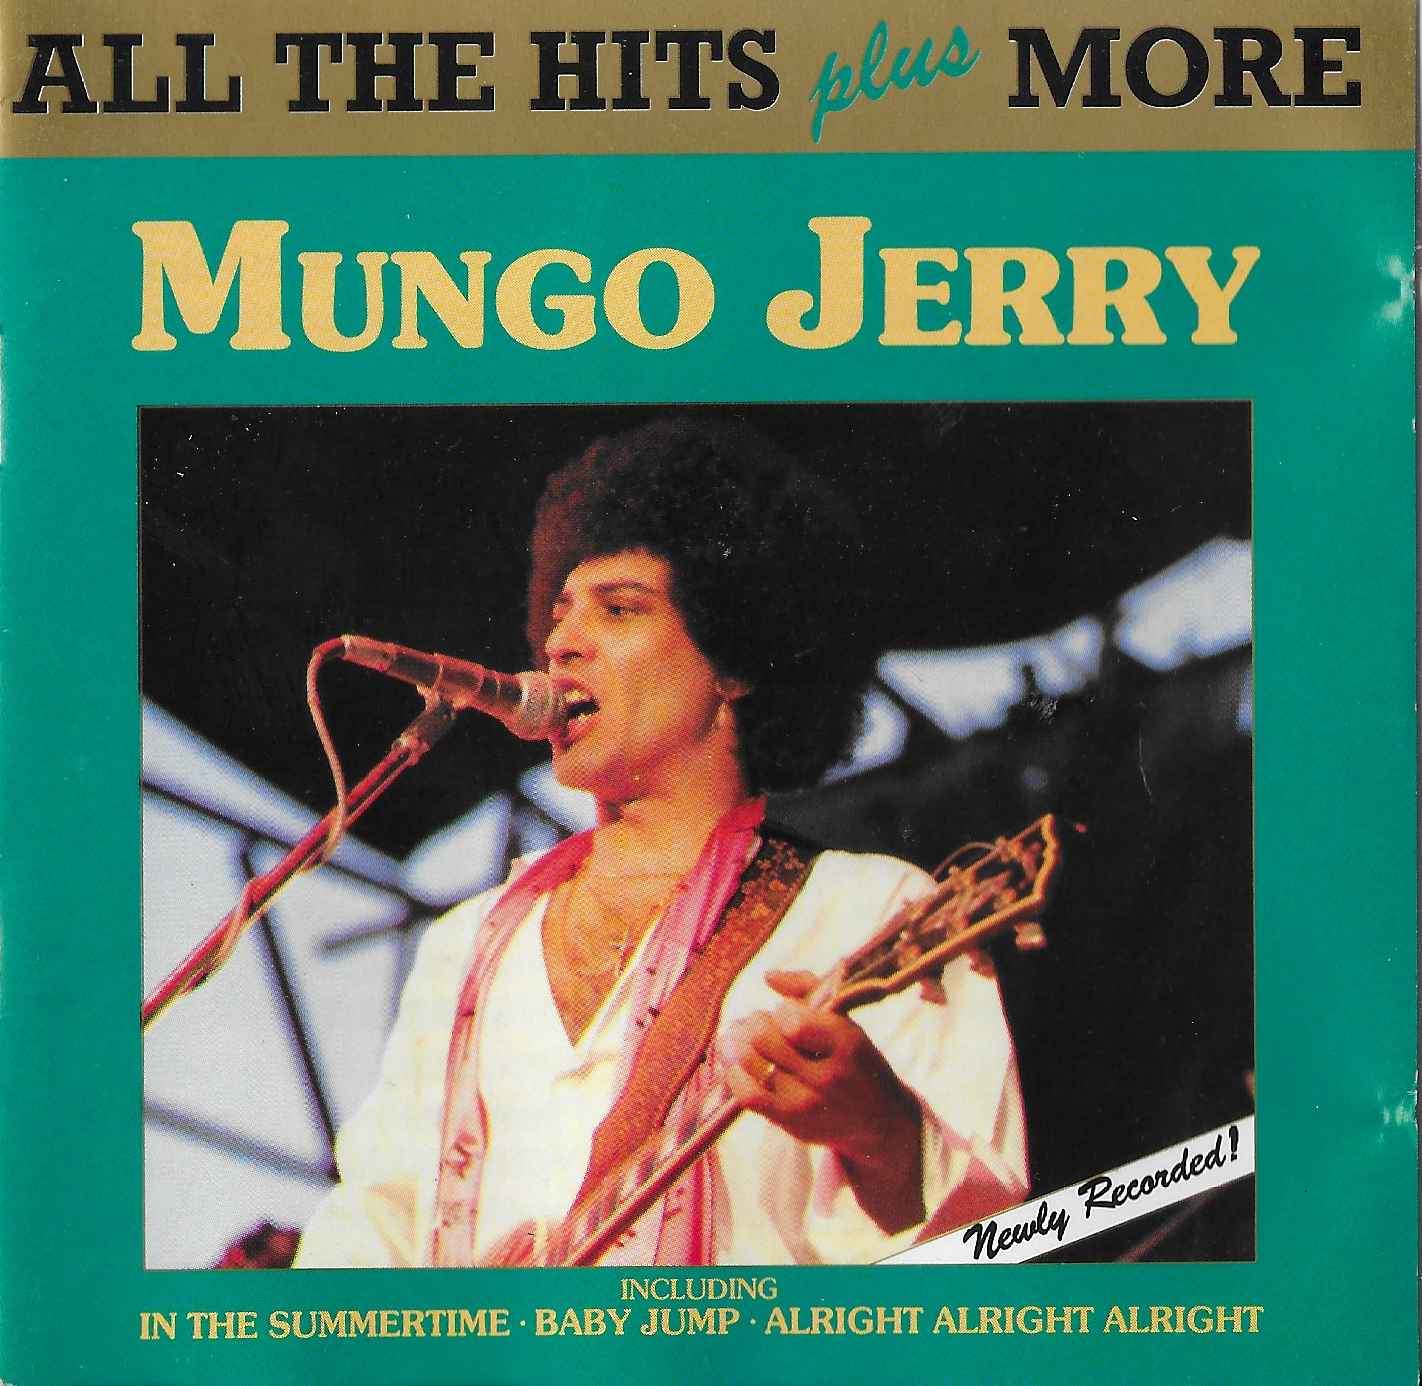 Picture of All the hits plus more by artist Mungo Jerry from the BBC cds - Records and Tapes library